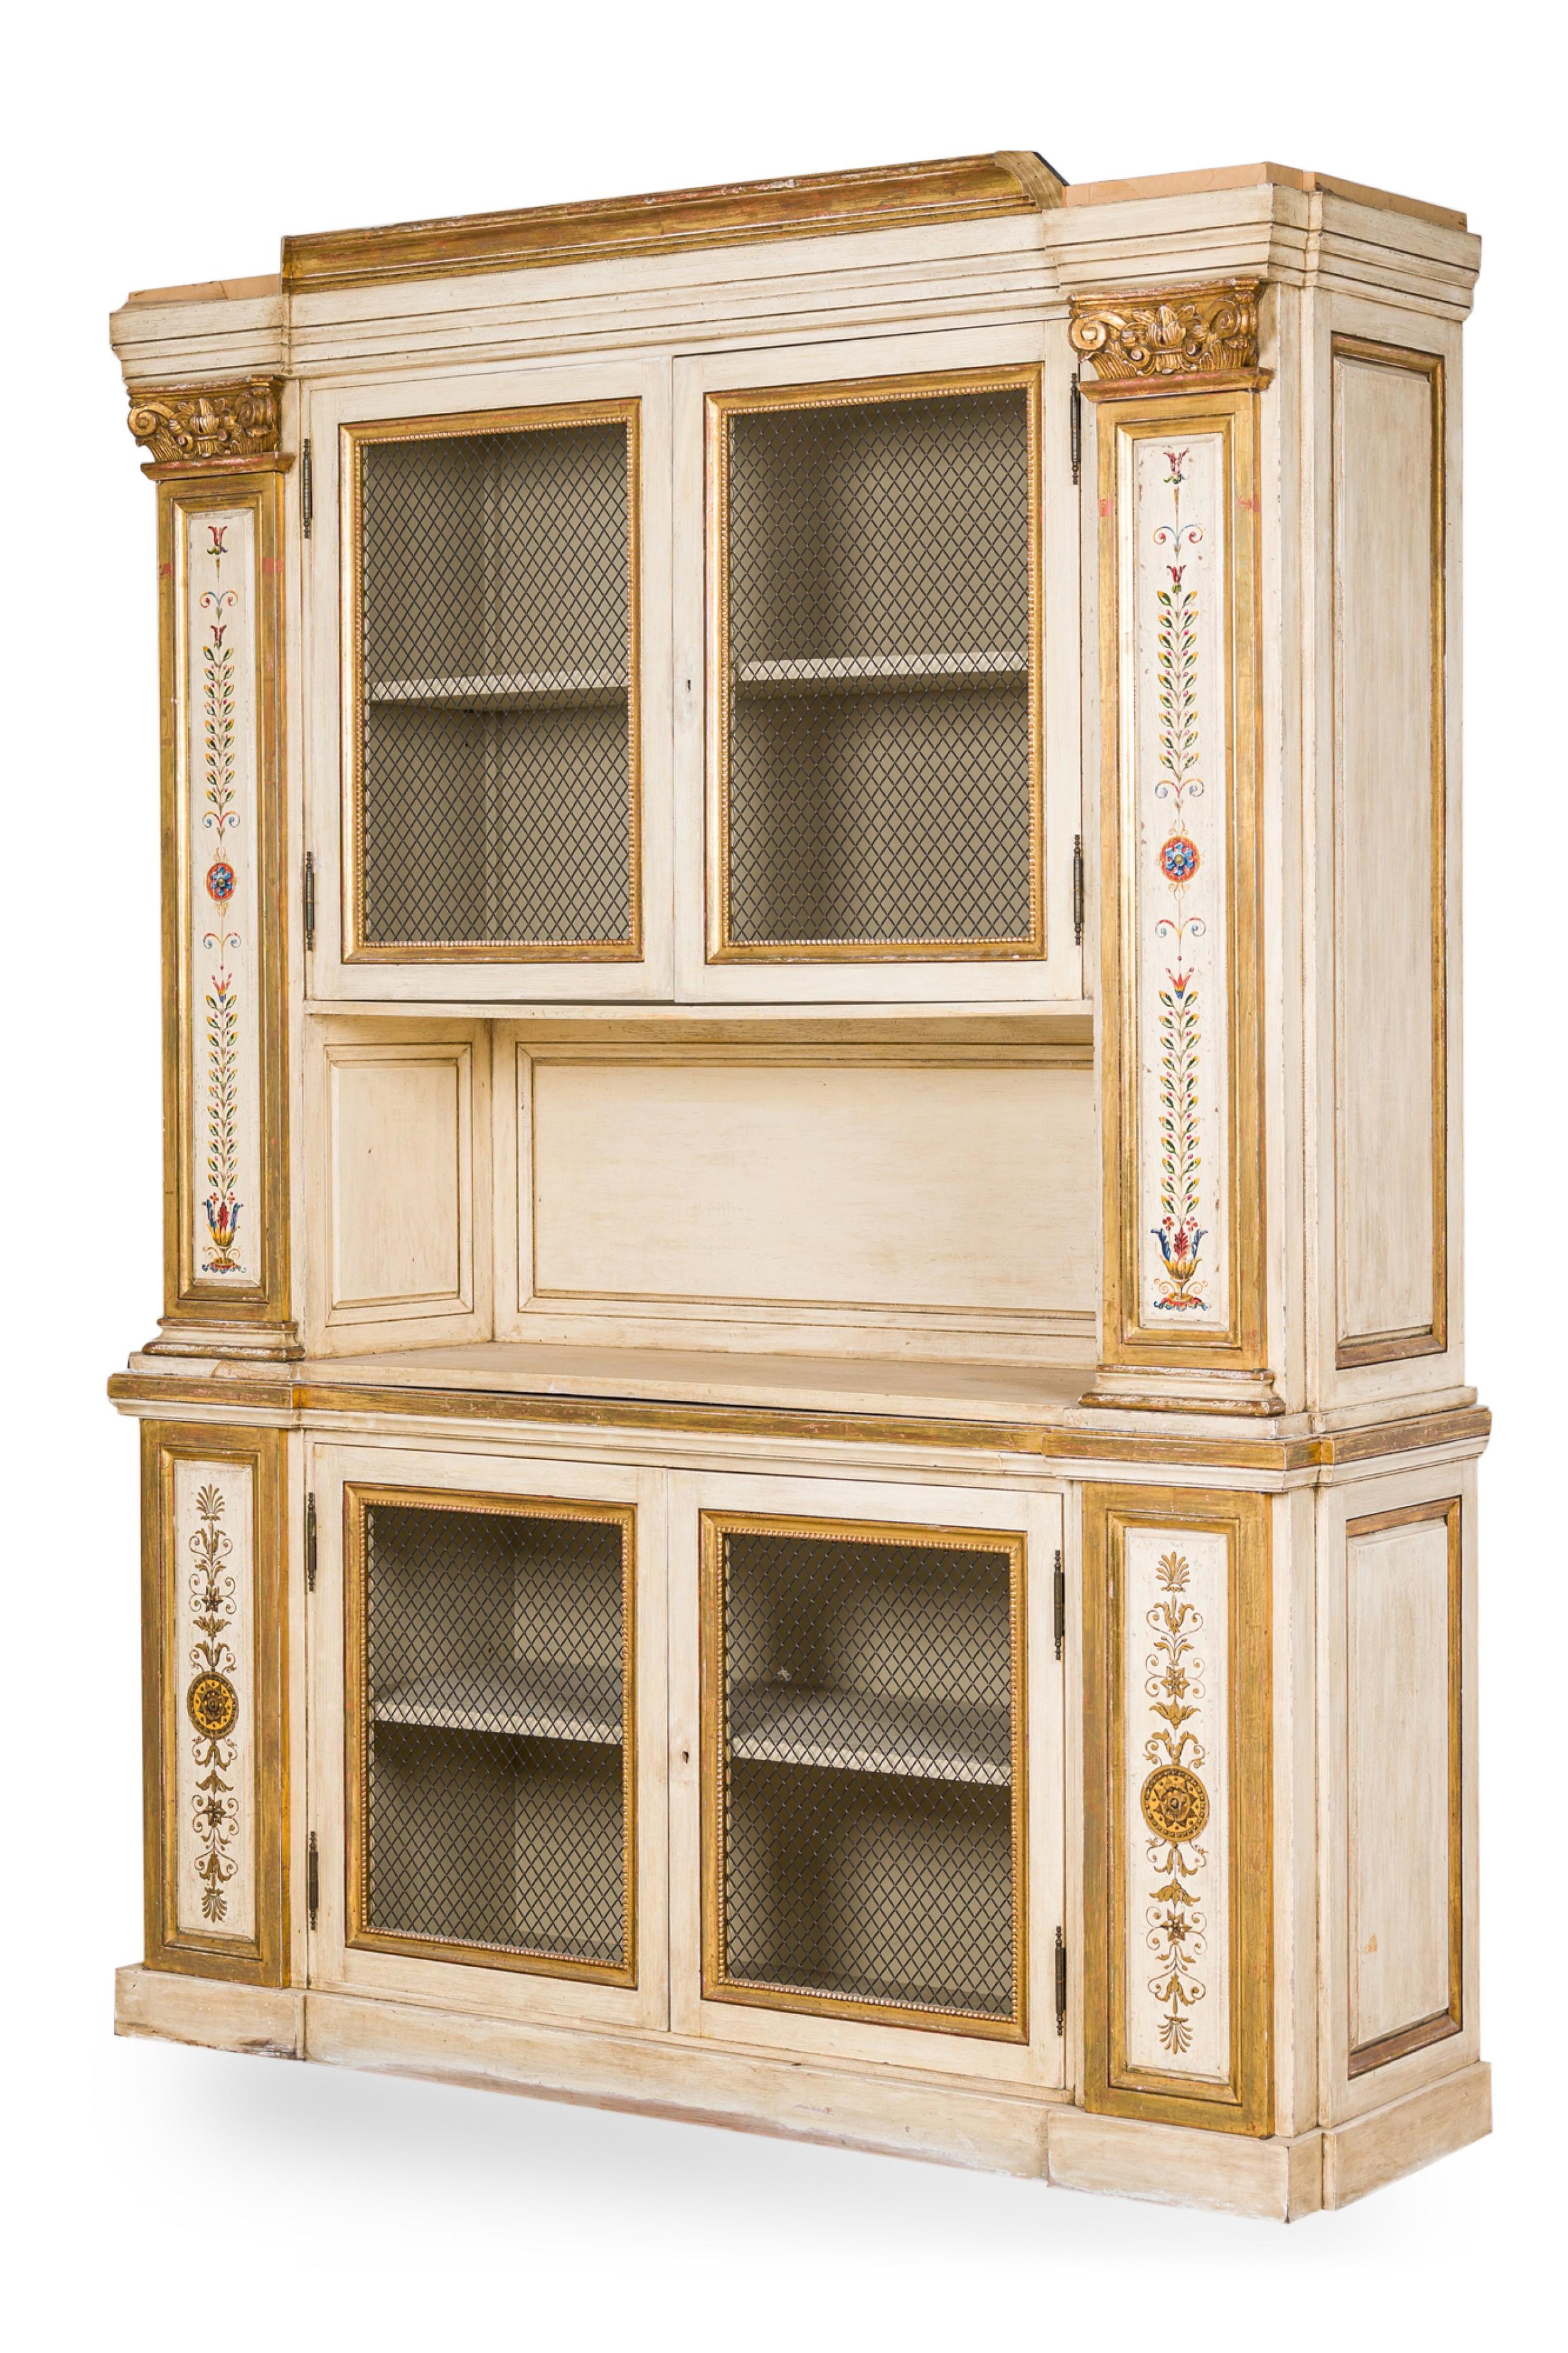 Italian Neo-Classic monumental off-white painted and gilt trimmed breakfront / bookcase having 2 upper and 2 lower doors with a wire mesh centering a recessed platform with column form decorated sides and carved capitals
 

 Condition: Good; Minor